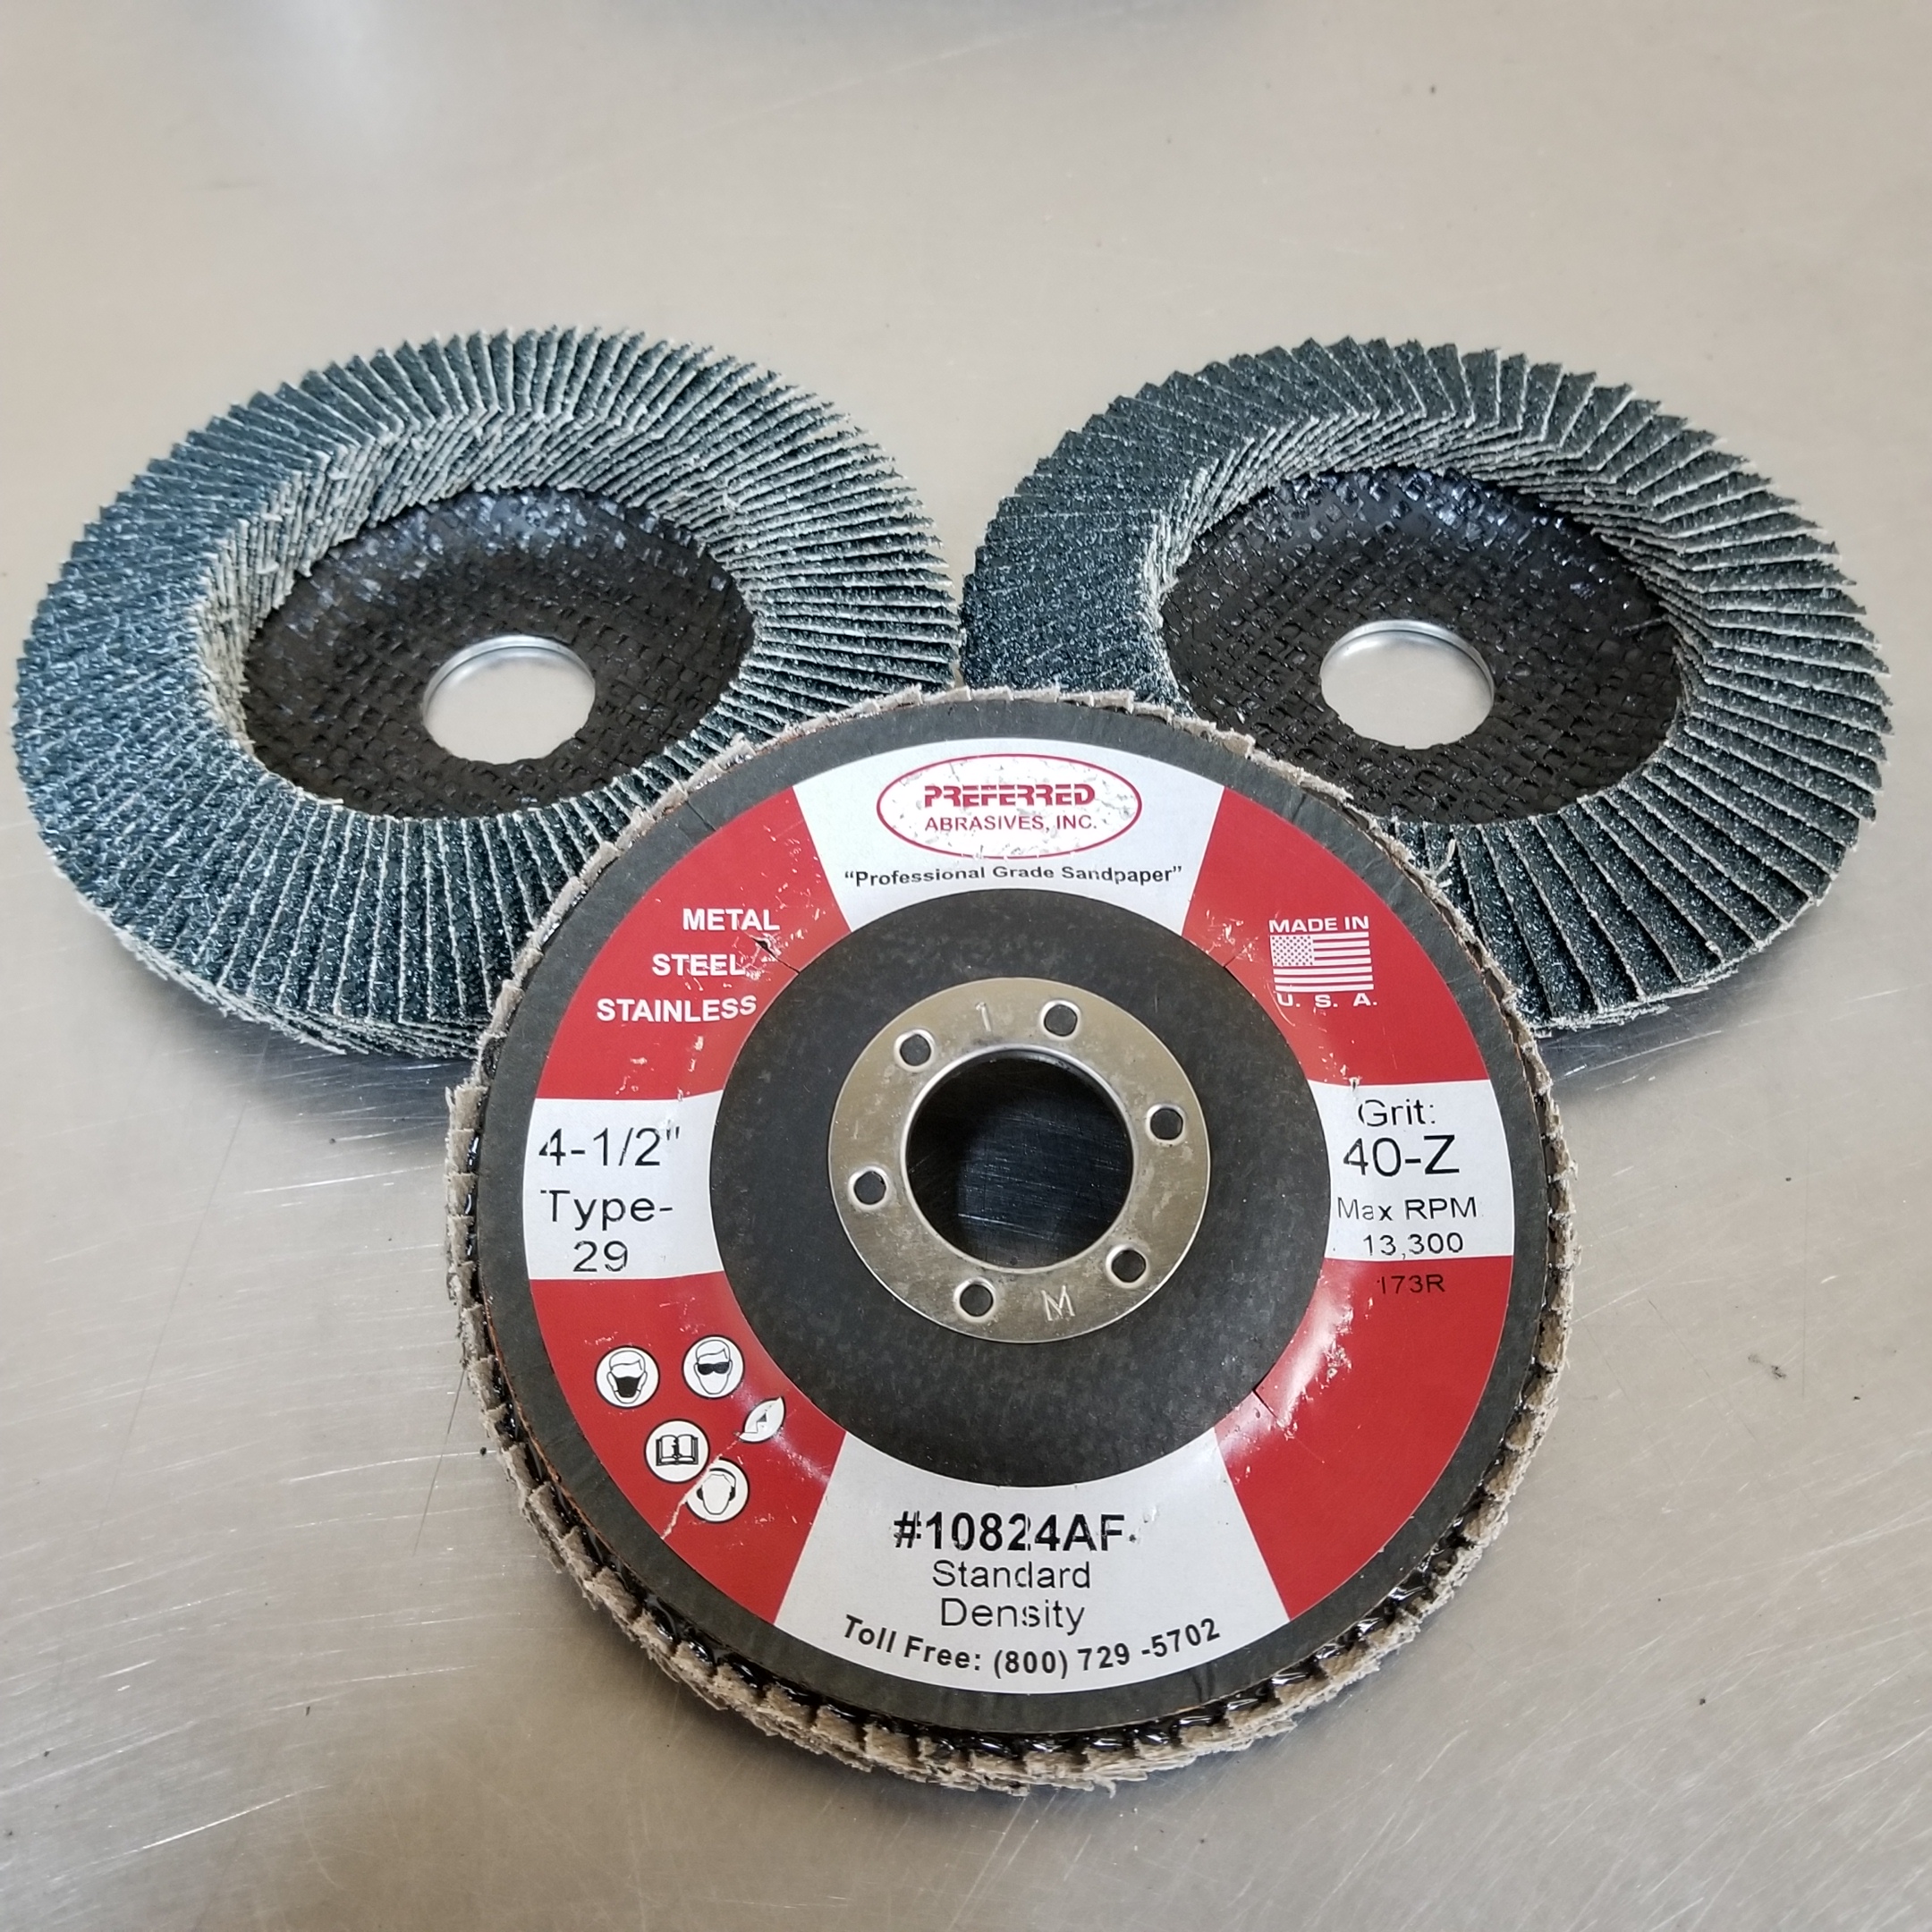 Type 29 4-1/2 Dia Phenolic Backing Threaded Hole 4-1/2 Dia. Weiler Saber Tooth Abrasive Flap Disc Ceramic Aluminum Oxide 80 Grit Weiler Corporation 50107 Pack of 1 